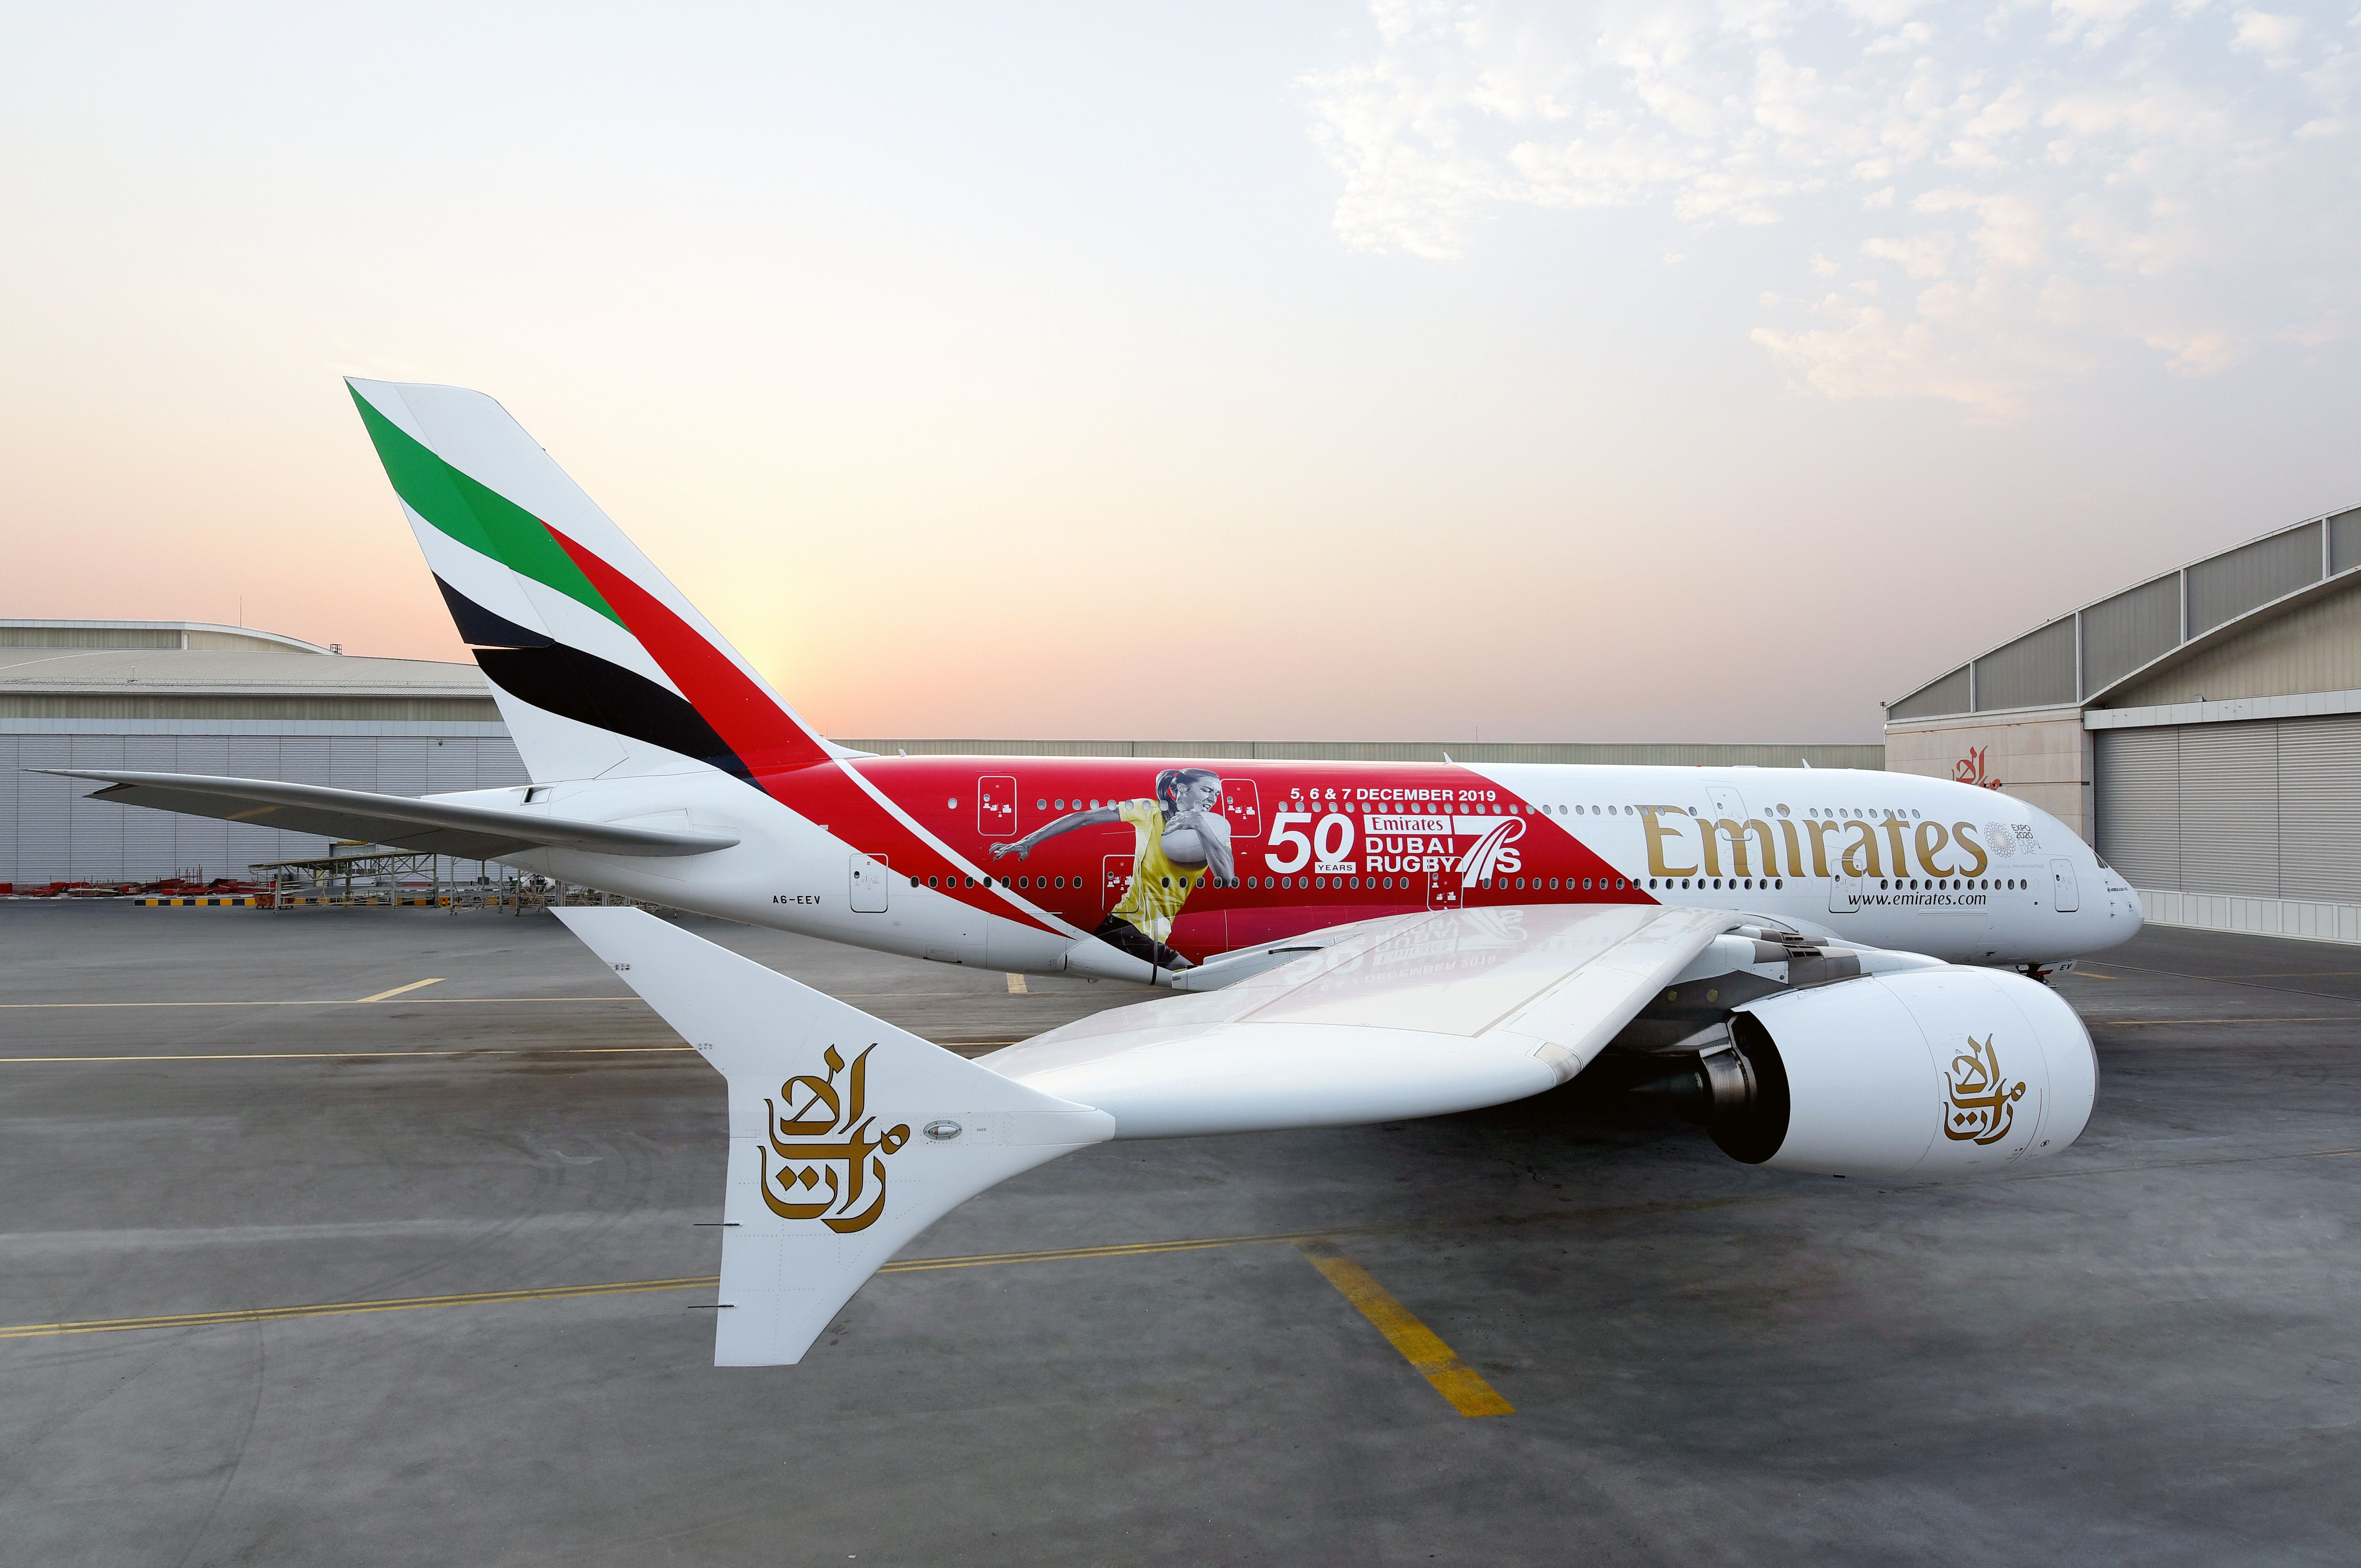 Emirates Airbus A380 2019 Rugby World Cup Livery